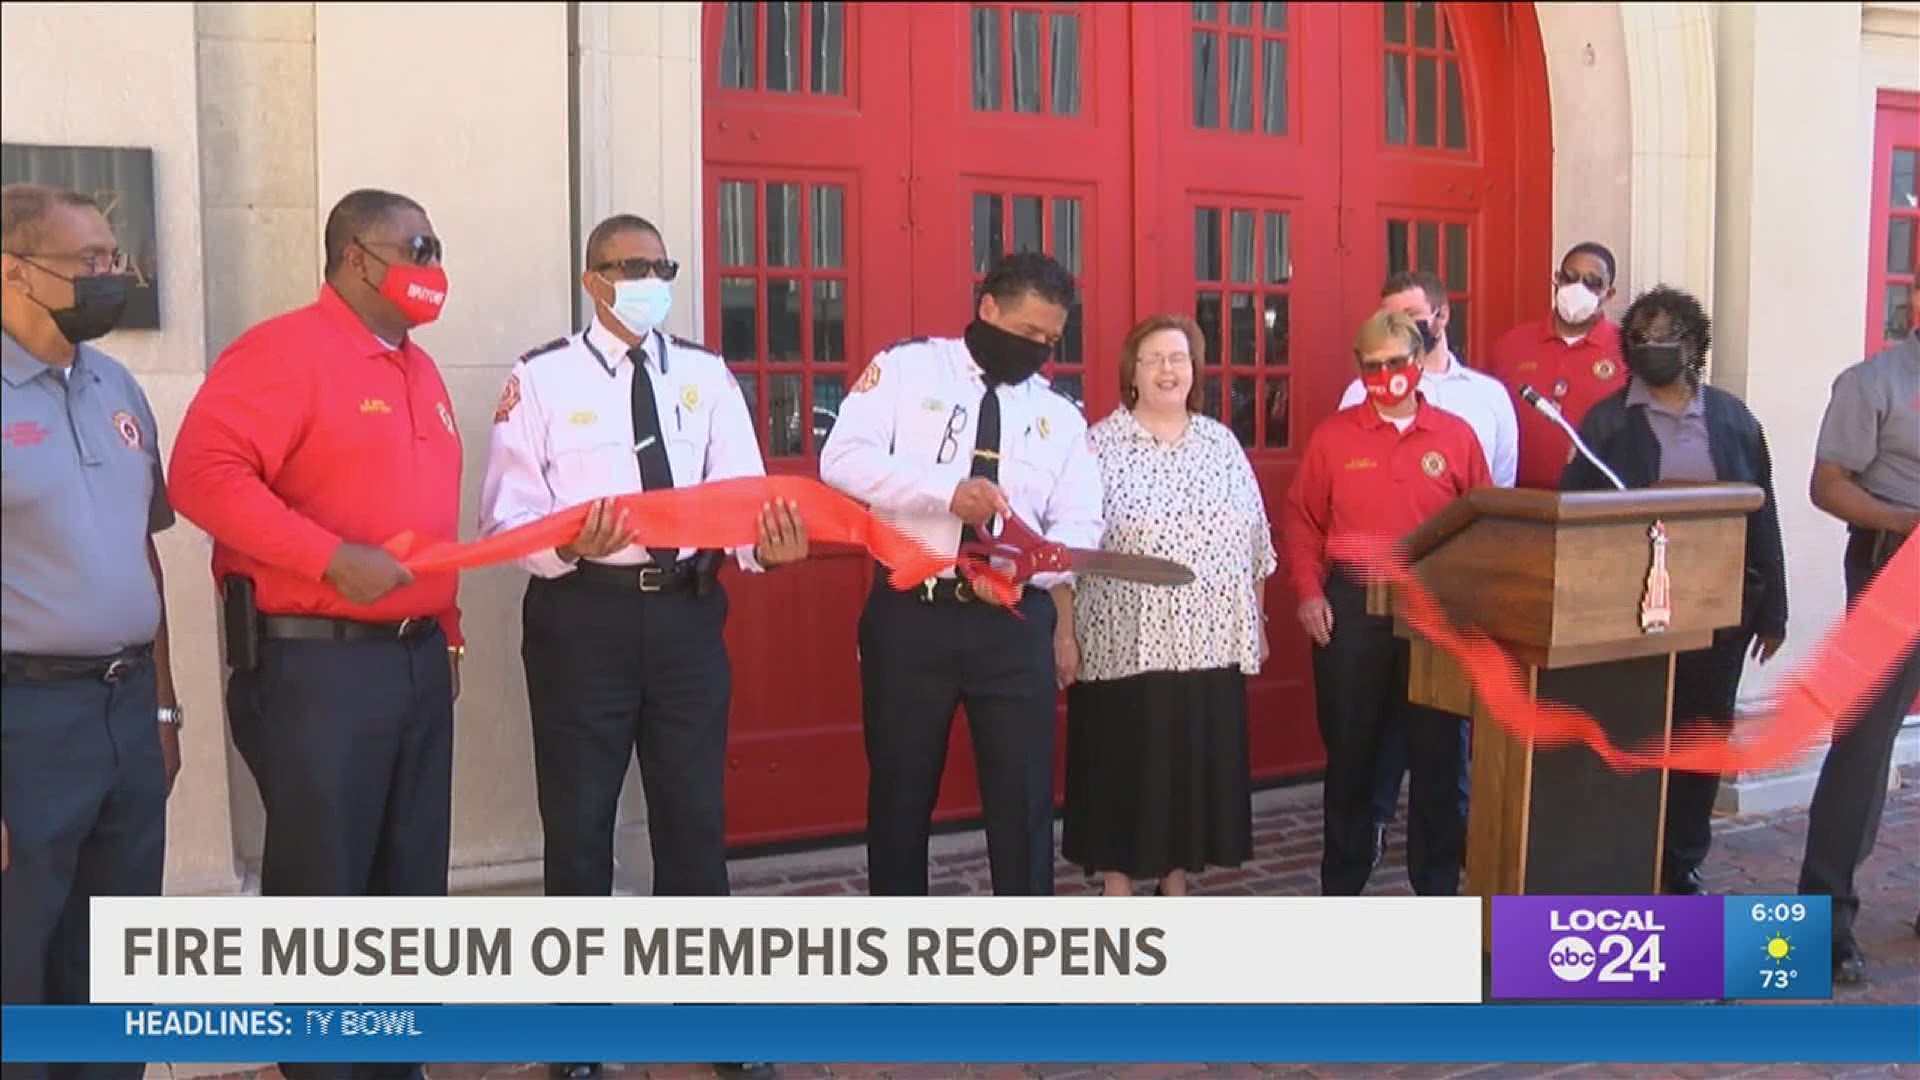 The museum reopened after being closed for three months for repairs and upgrades.